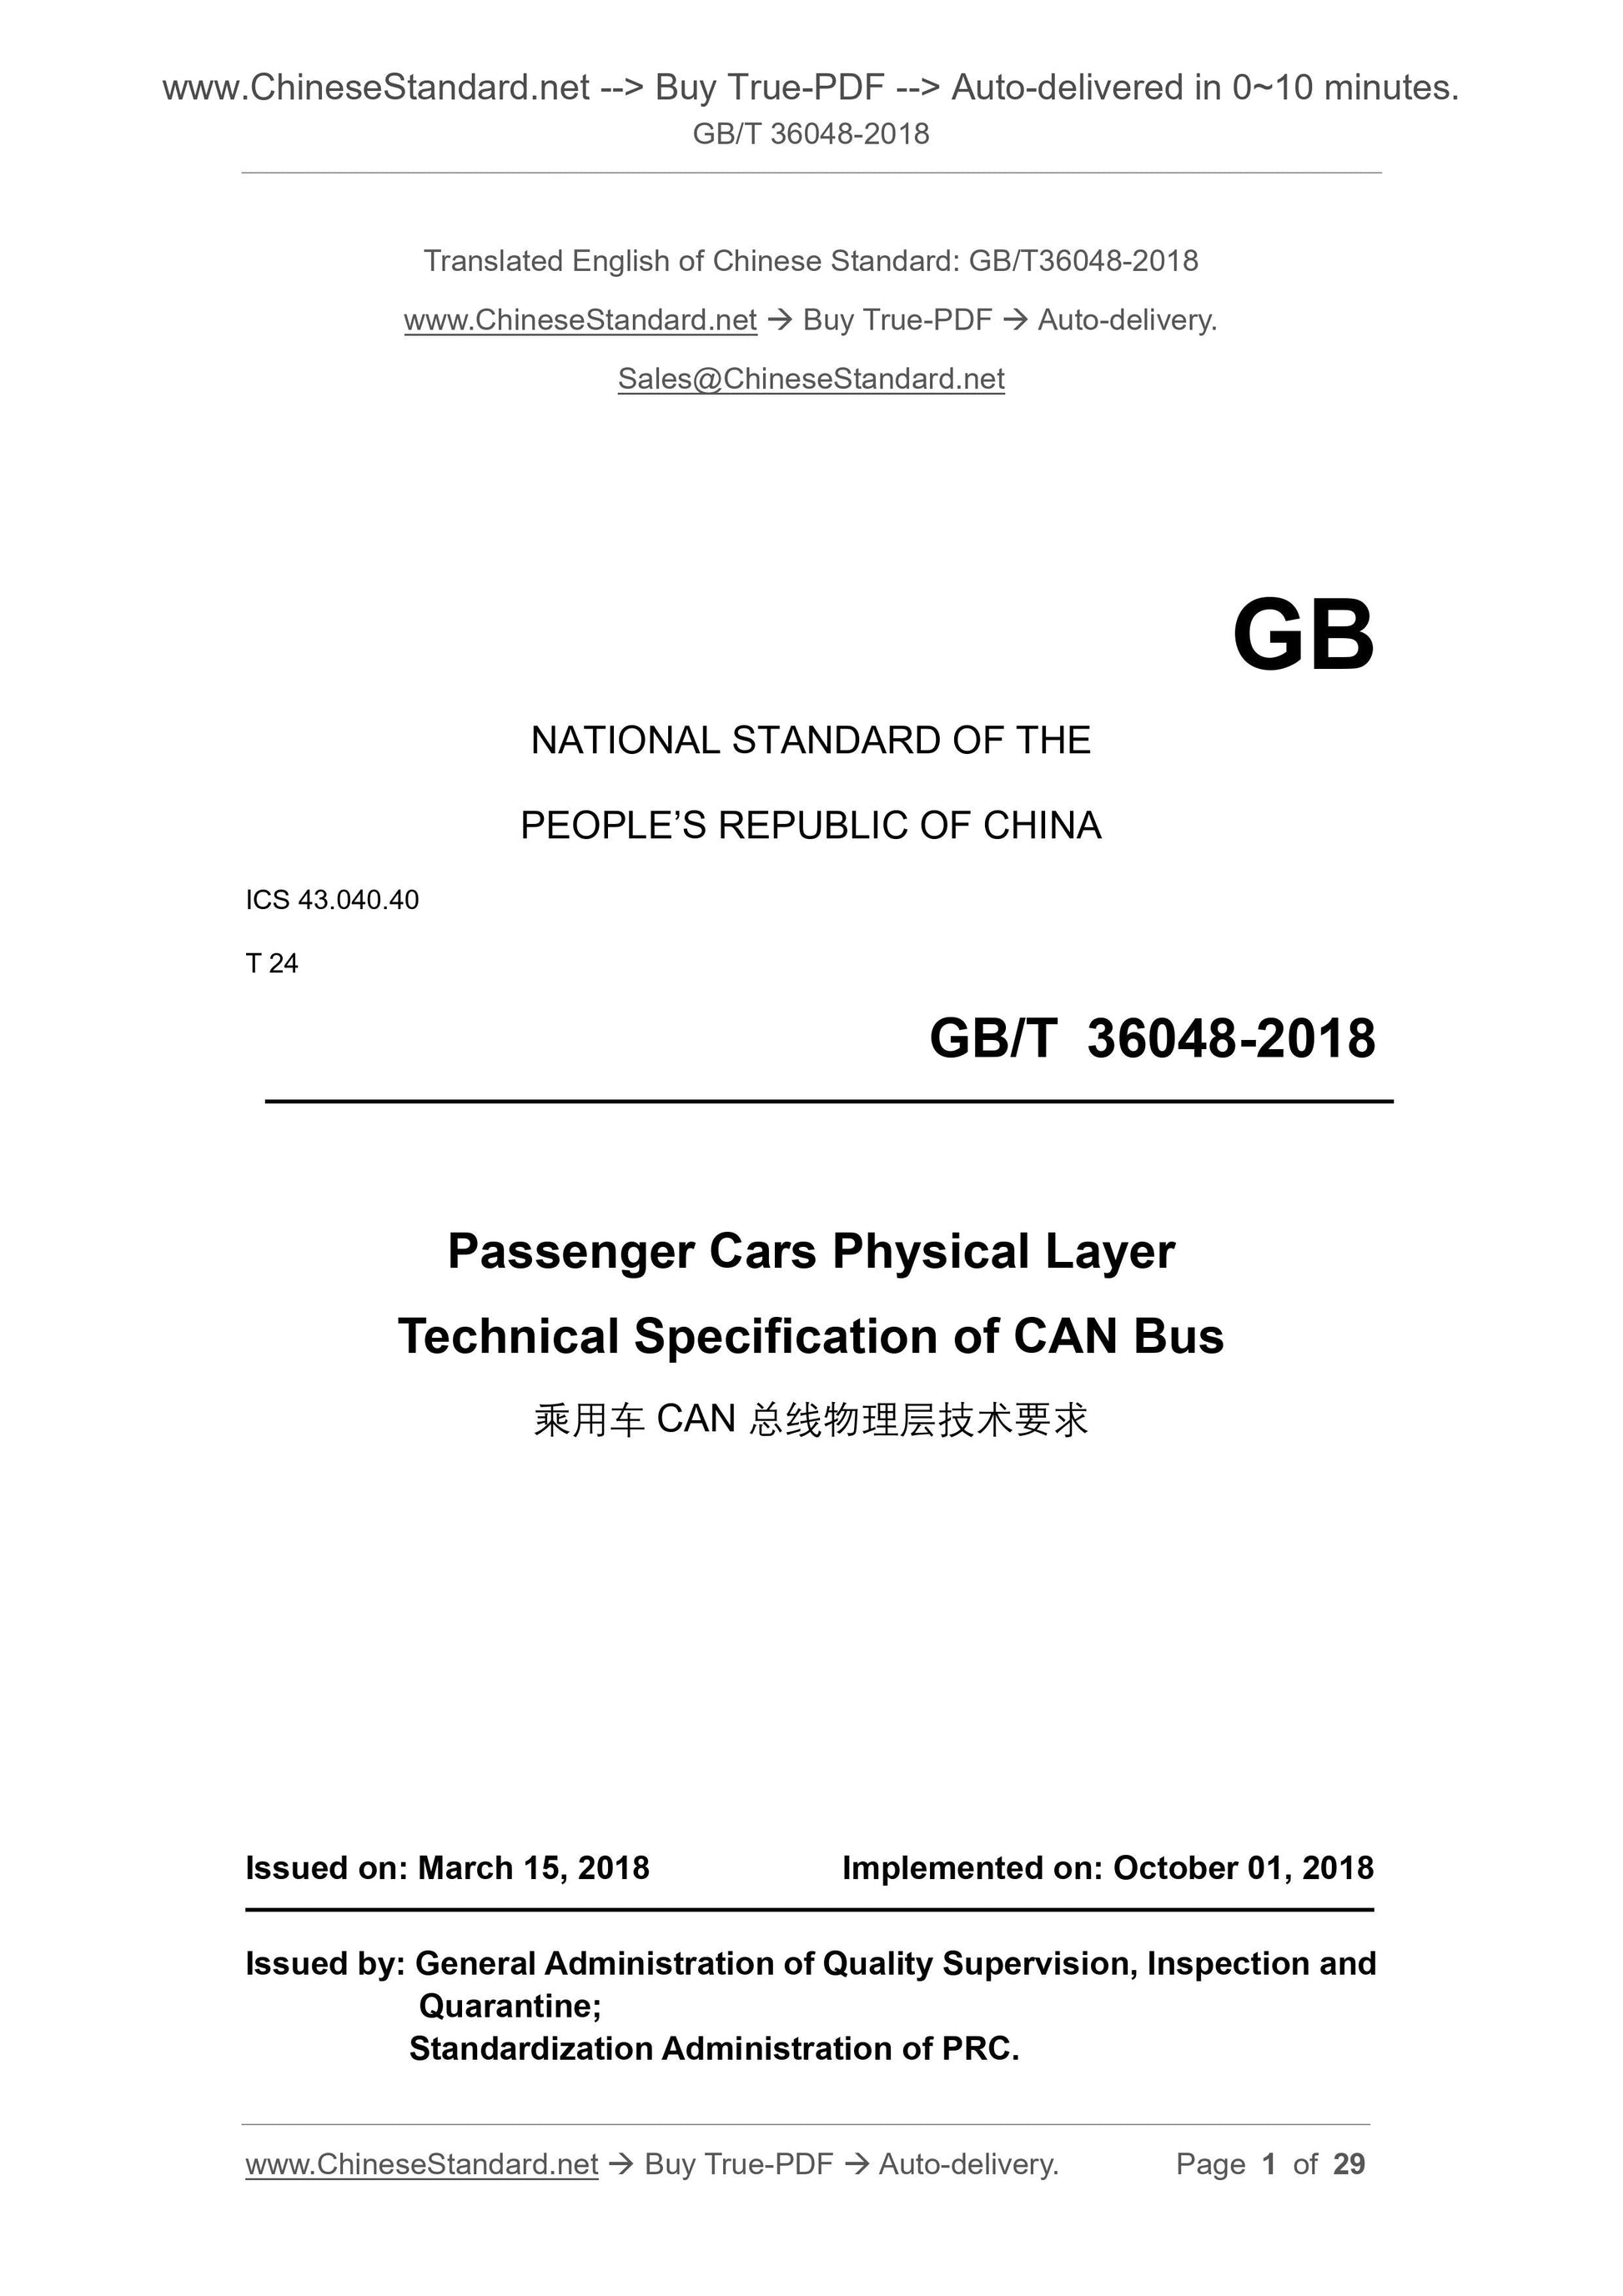 GB/T 36048-2018 Page 1